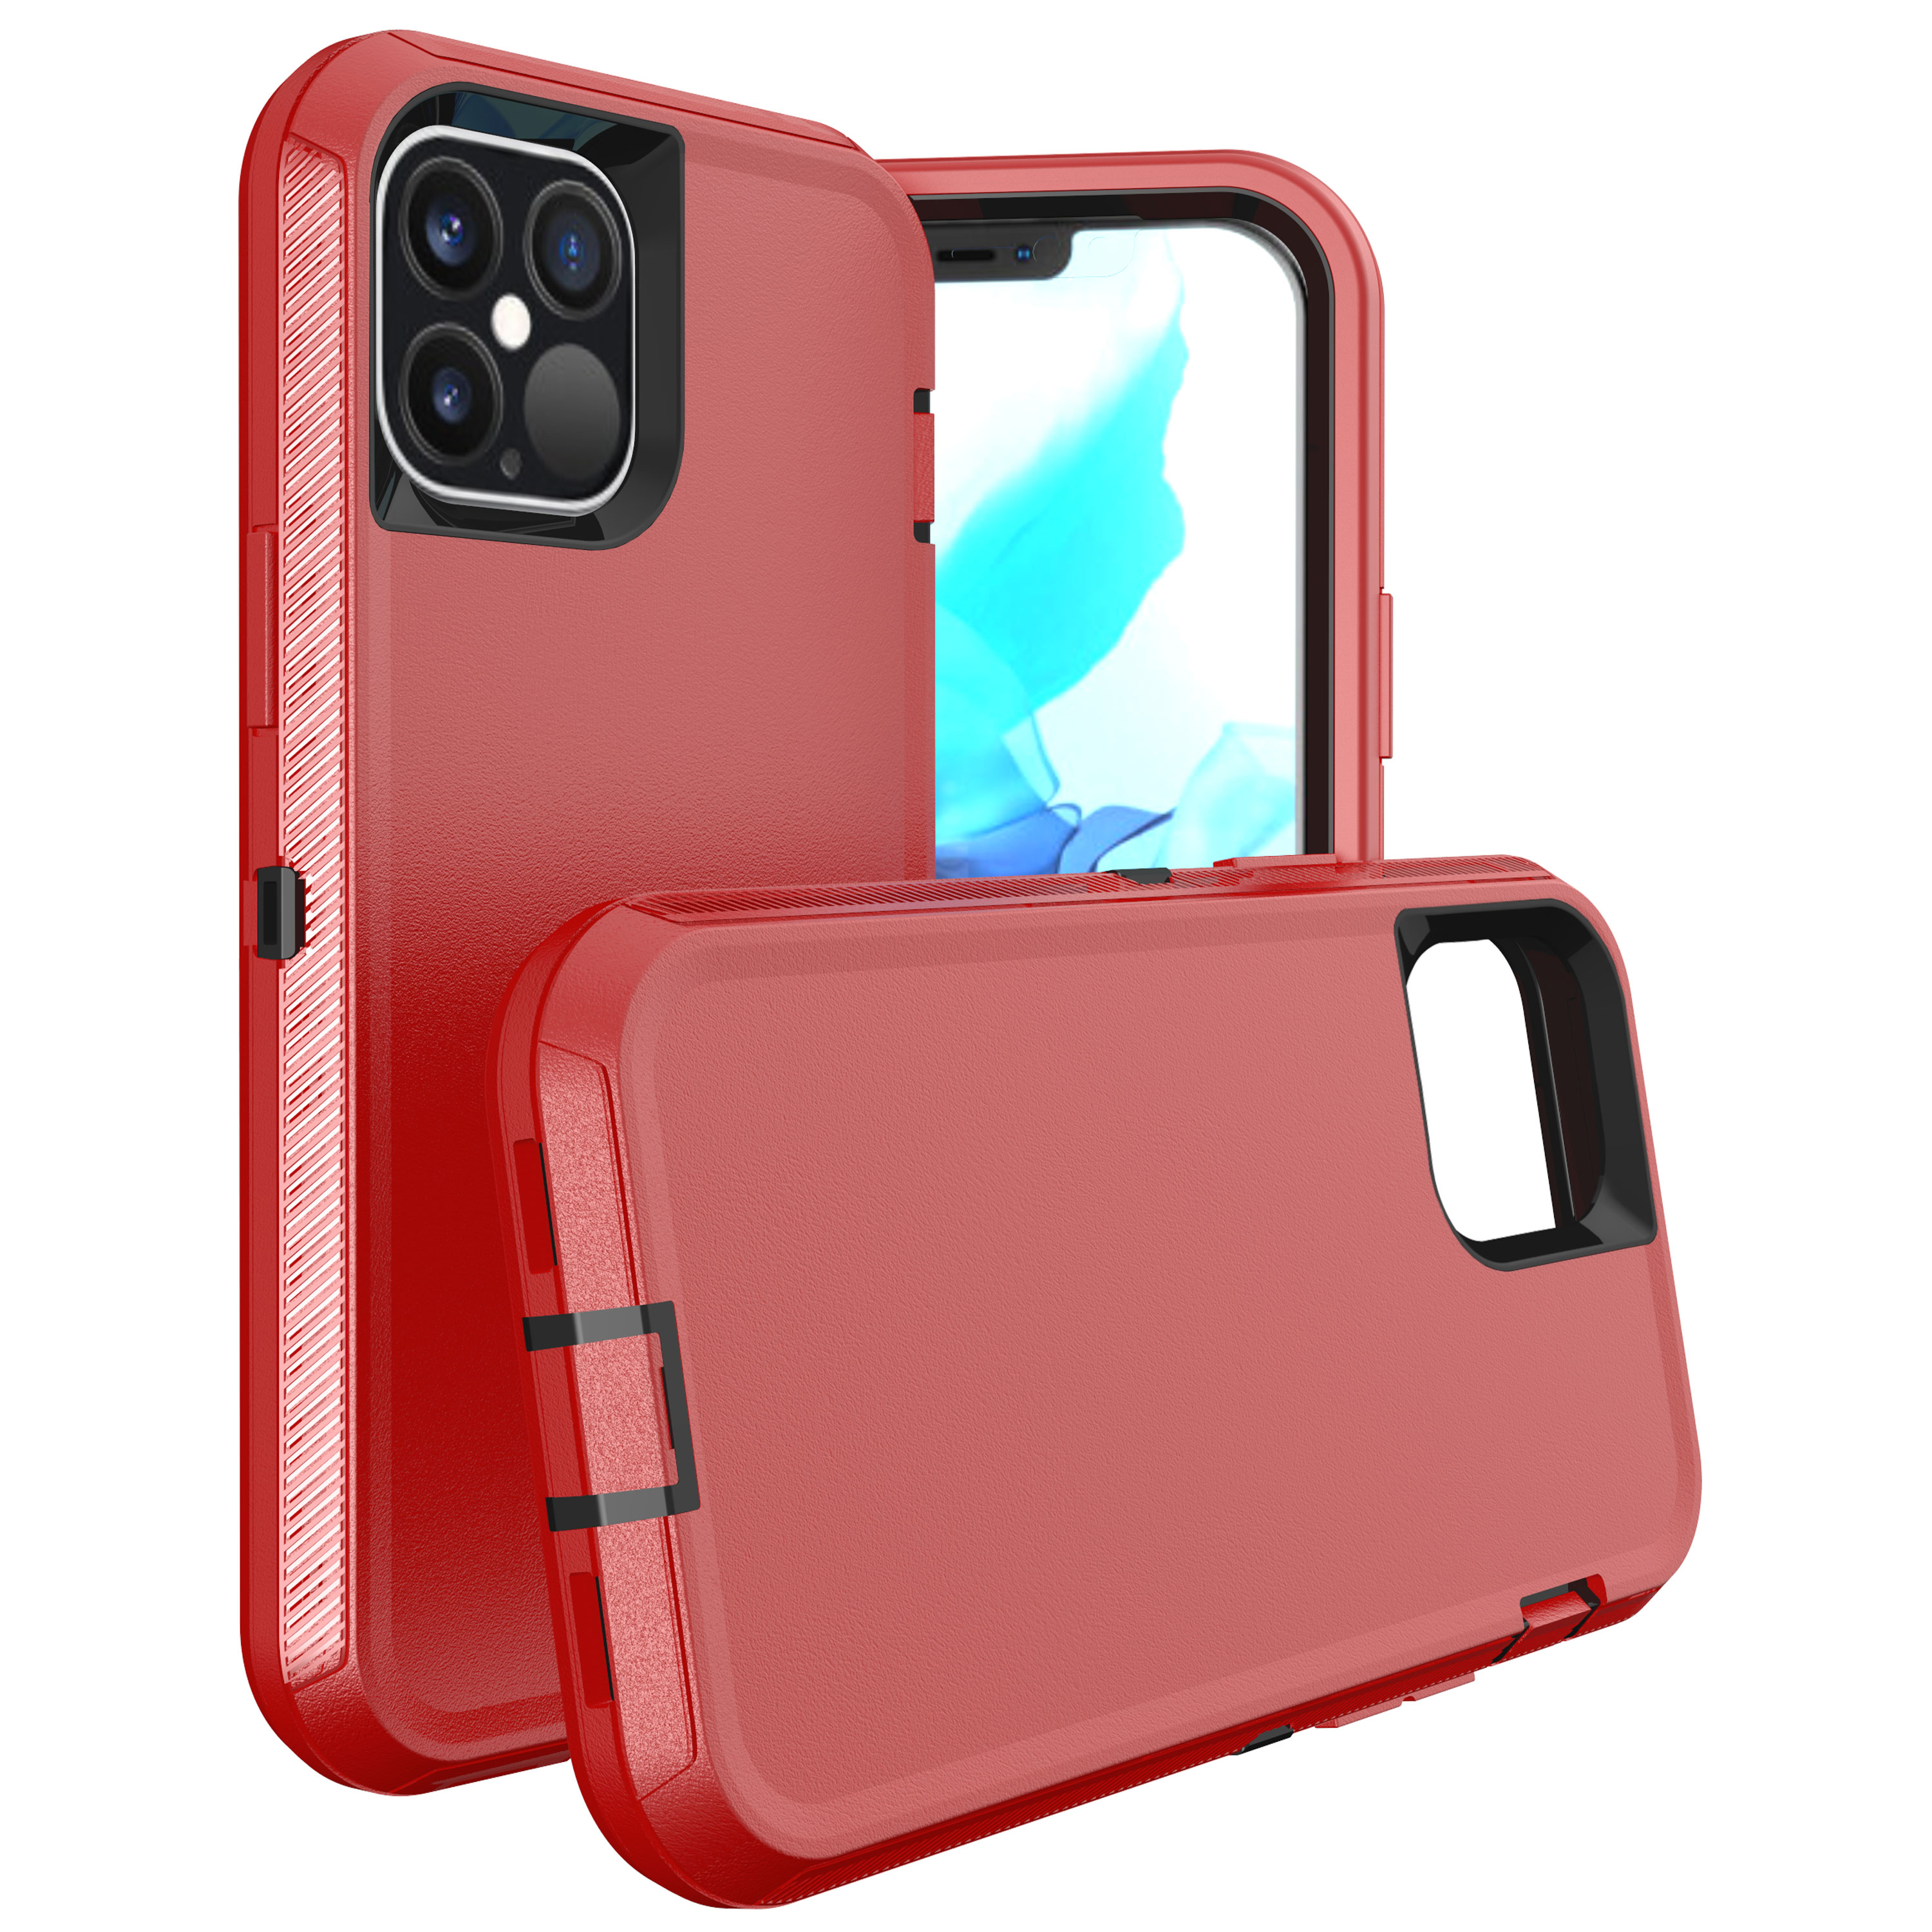 Armor Robot Case for iPHONE 12 Mini 5.4 (Red - Black)